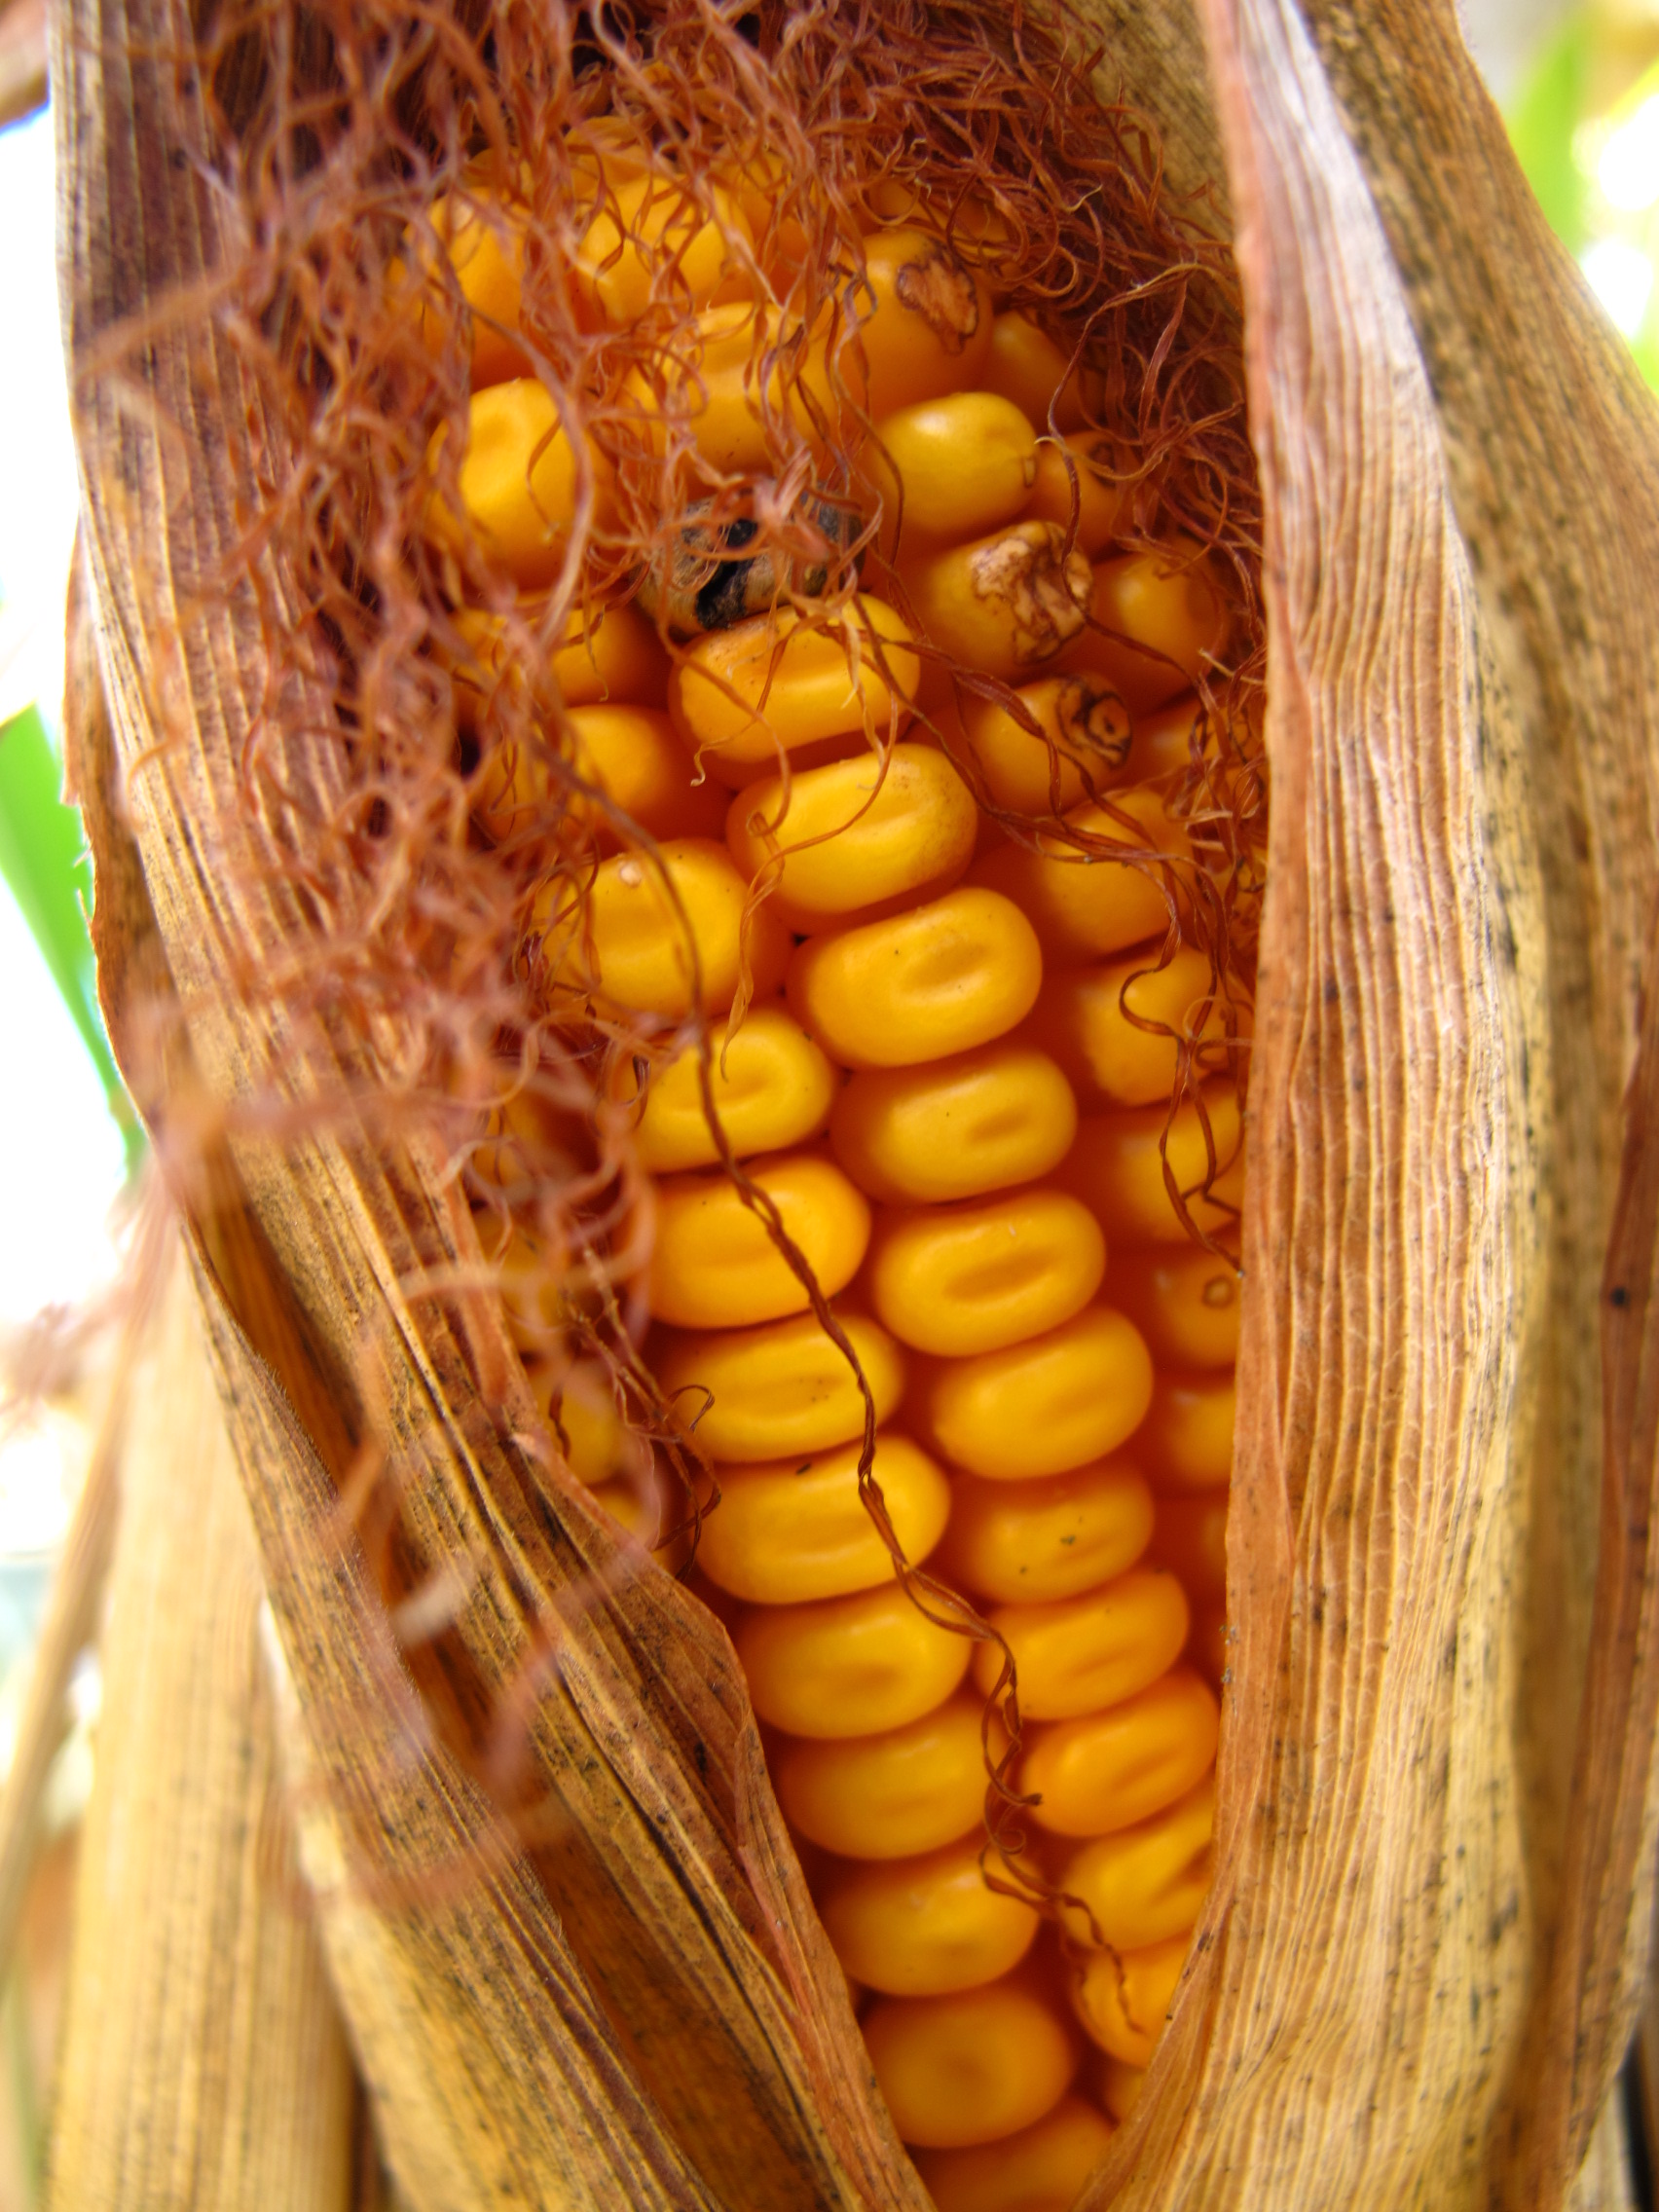 Corn (user submitted)